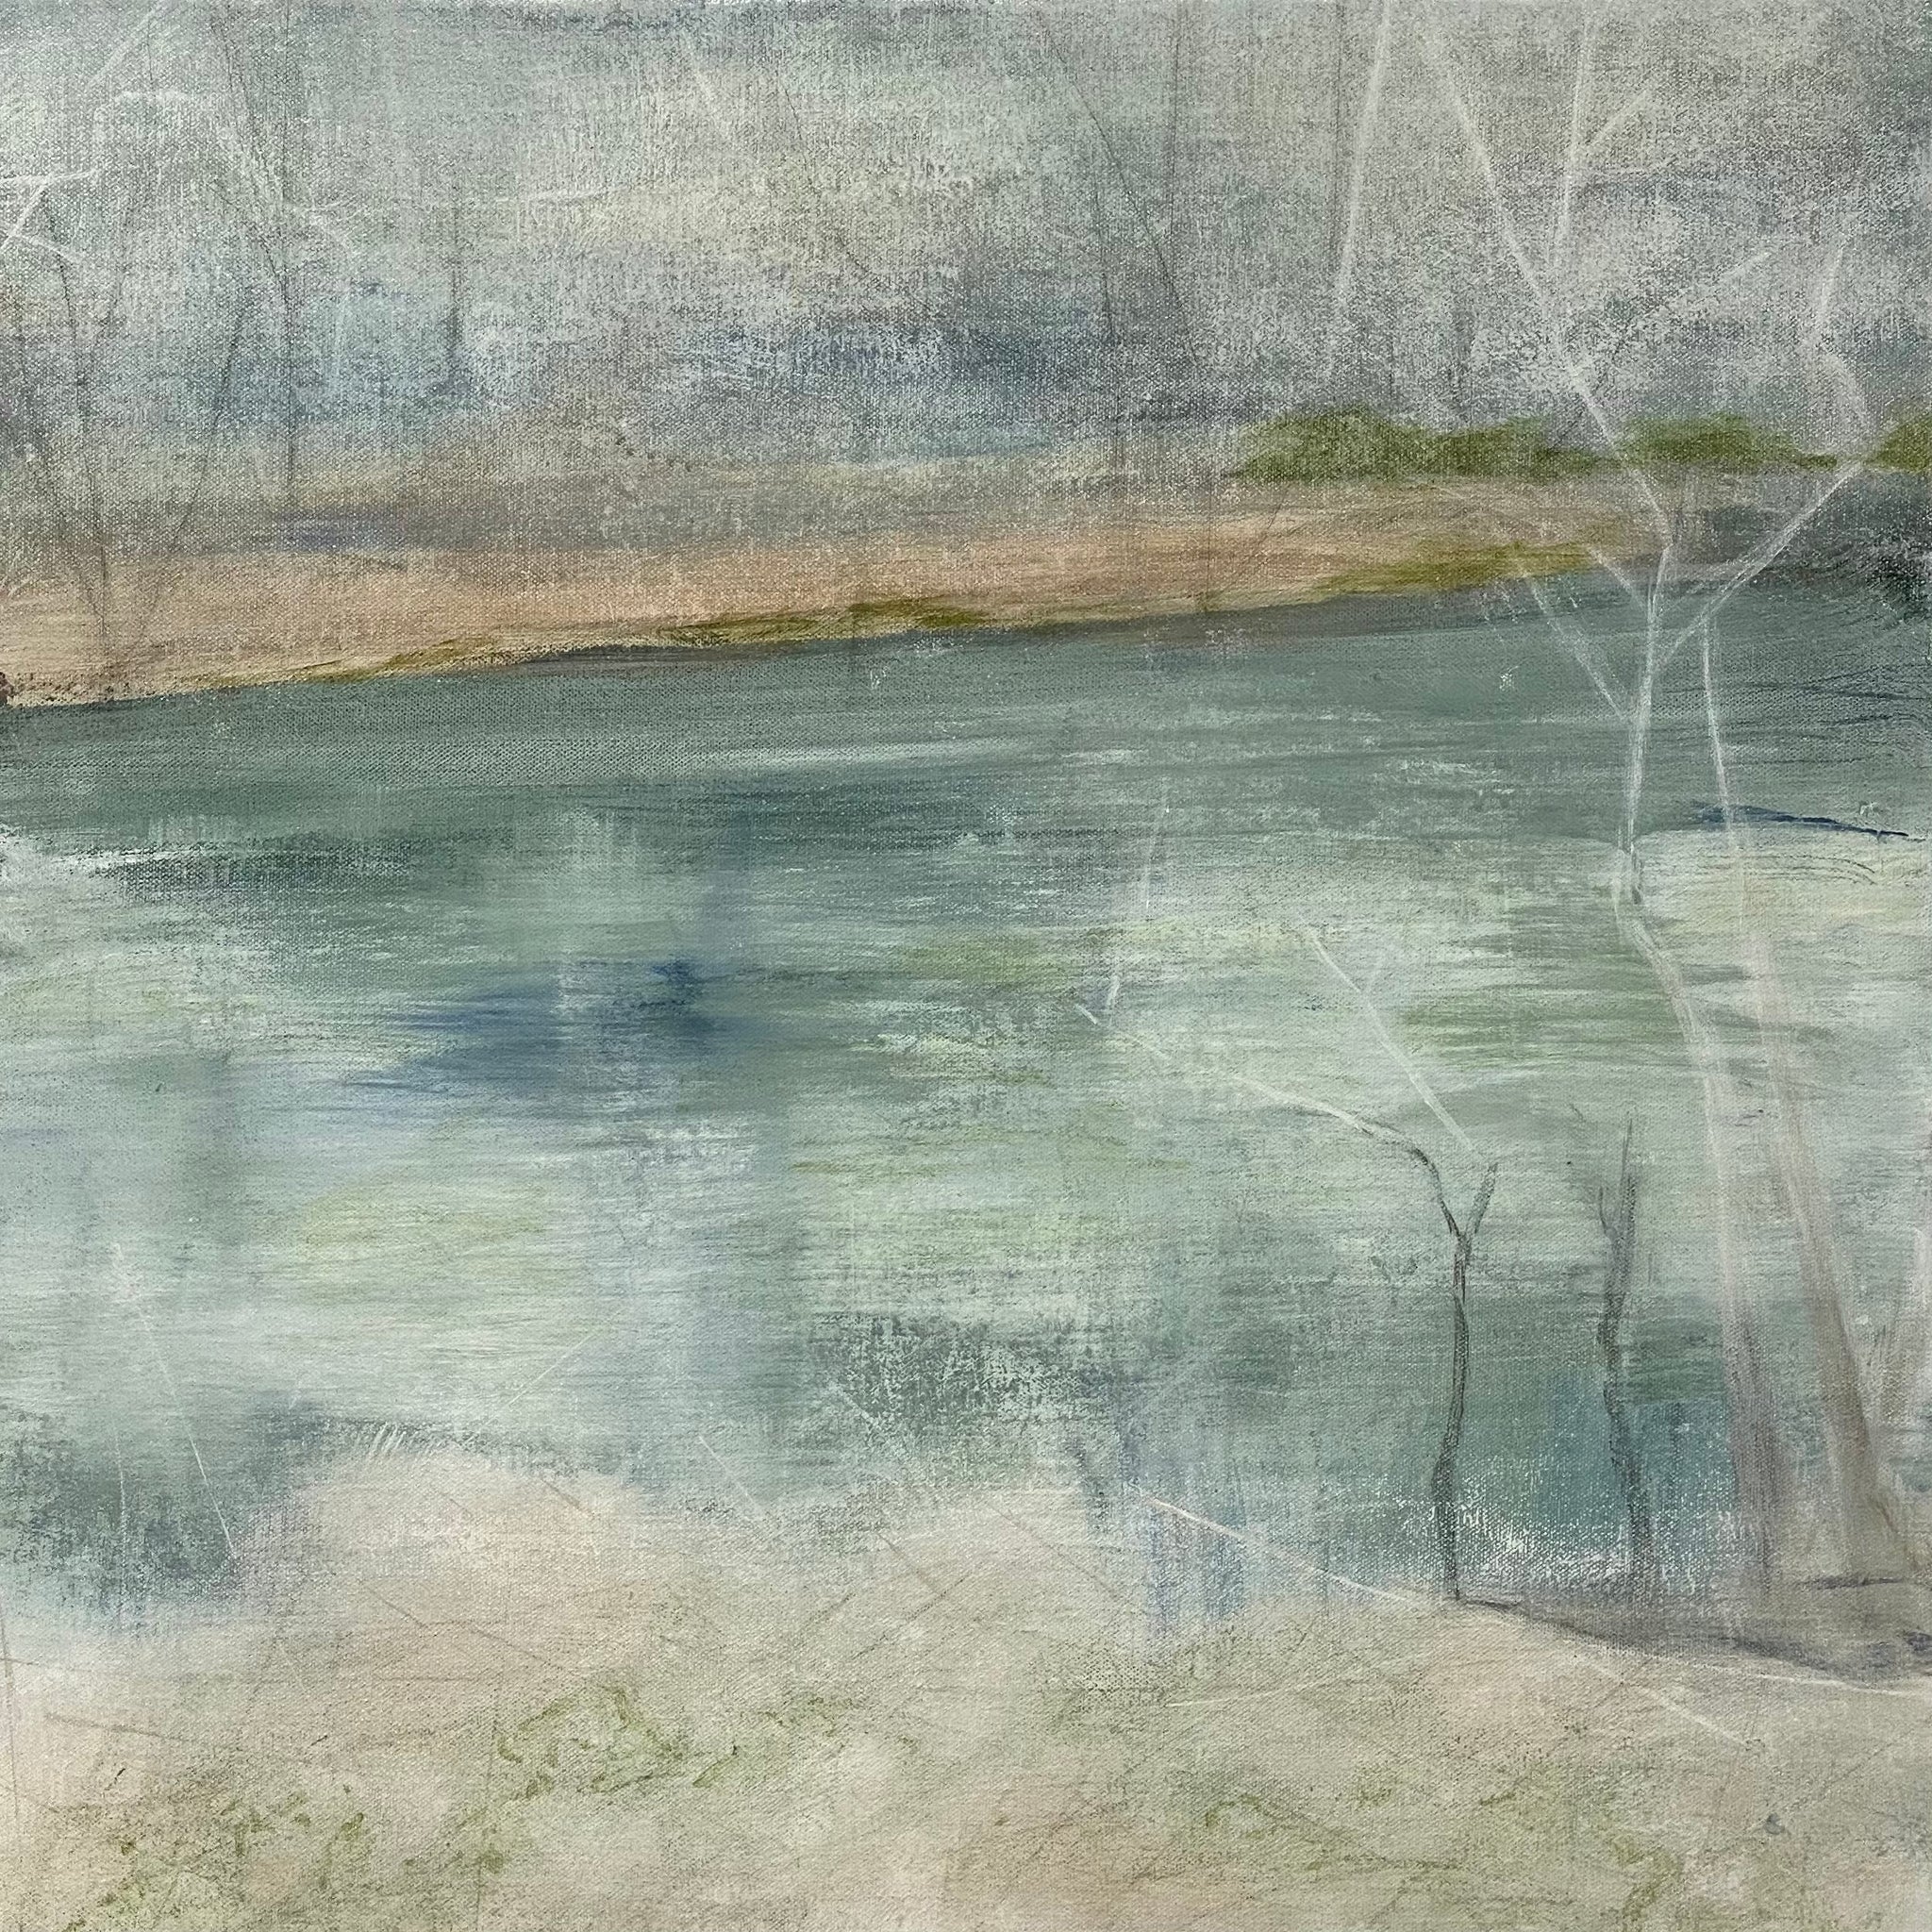 Juanita Bellavance, Spring foliage rising, From the Chestatee River portfolio, 2021, Acrylic on canvas, 24 x 24 inches